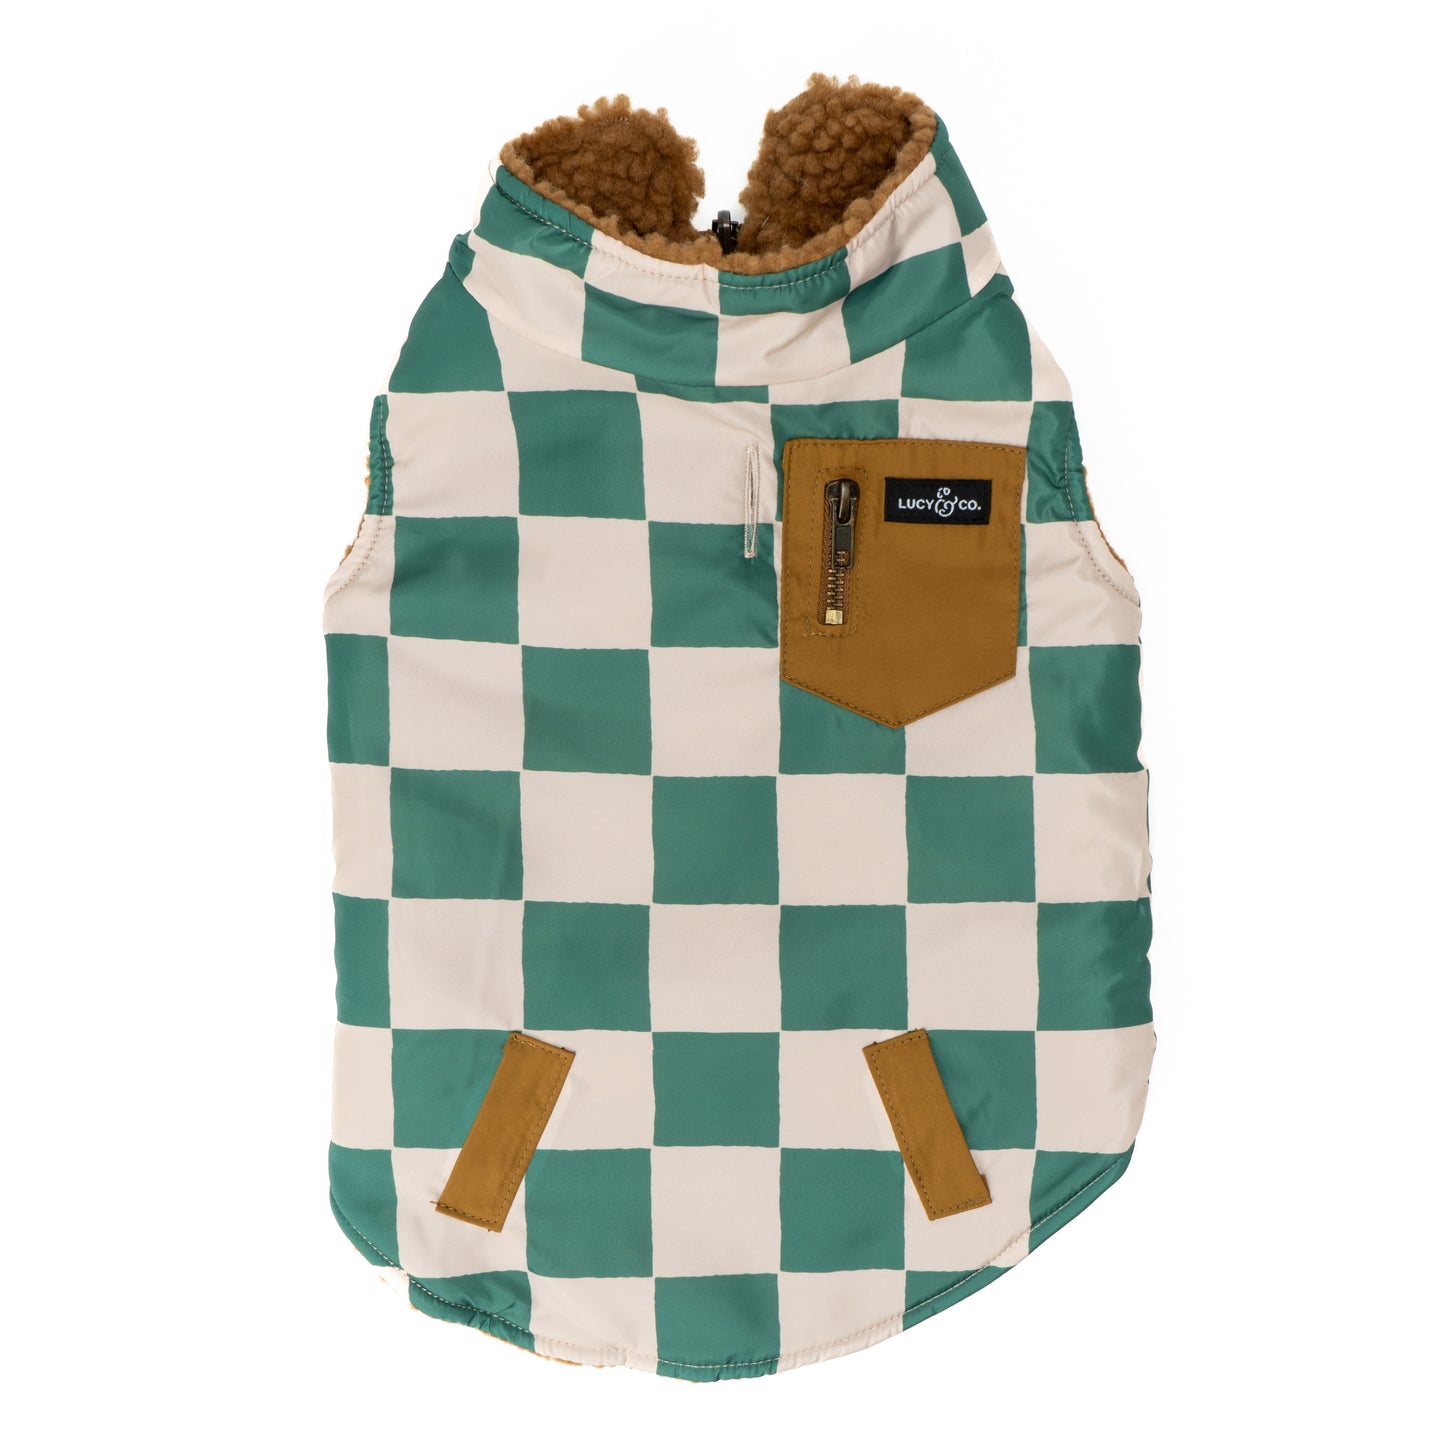 The You're a Square Reversible Teddy Vest